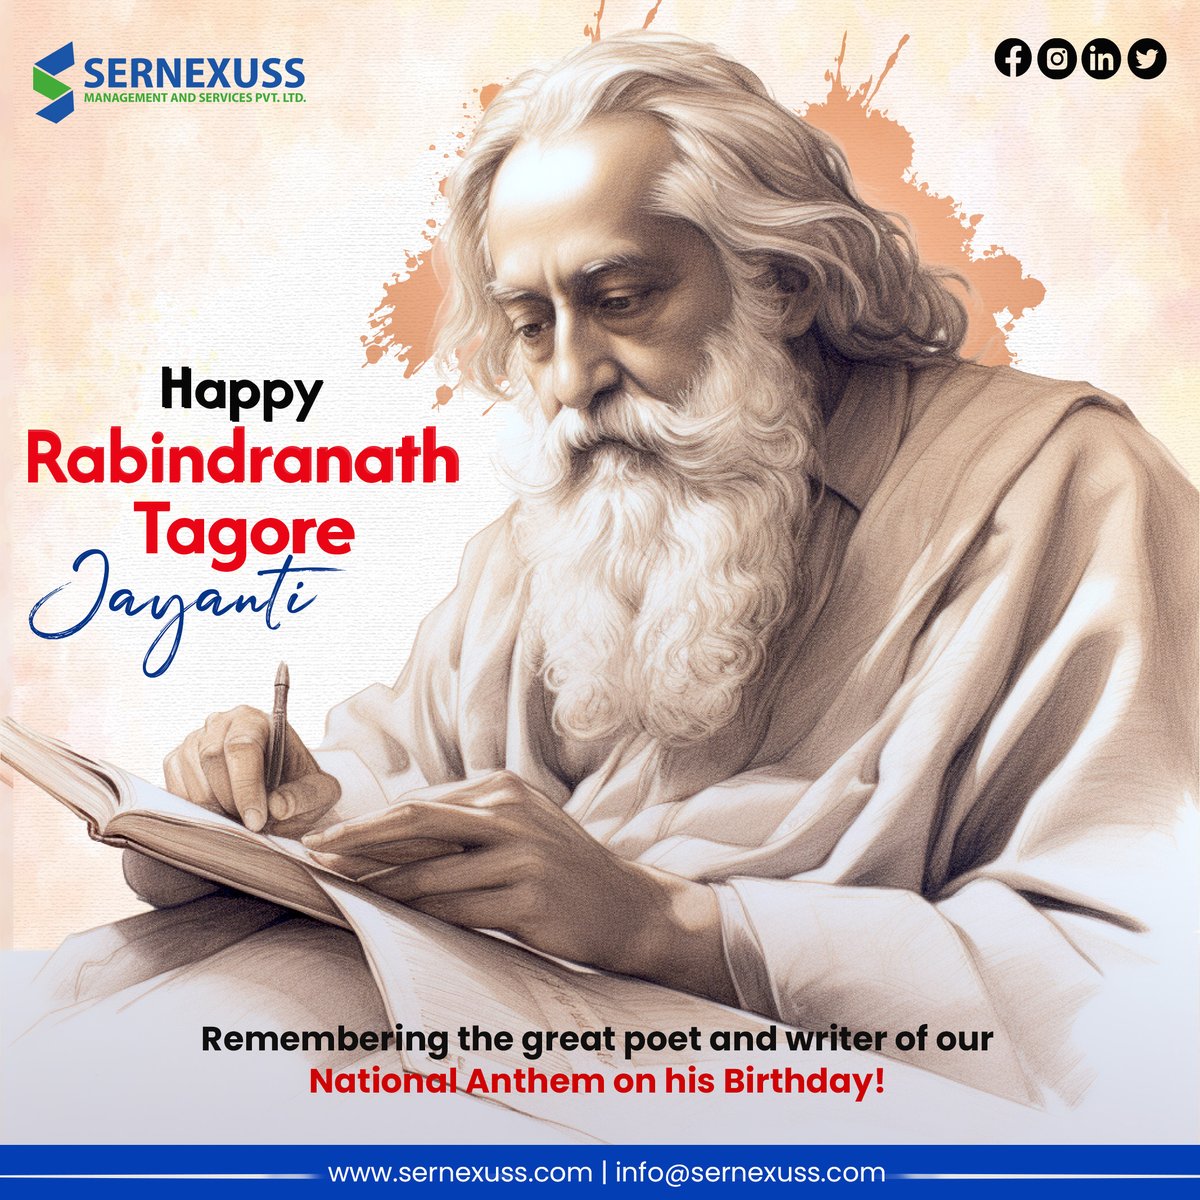 May the wisdom and poetry of Rabindranath Tagore continue to inspire us for generations to come. #rabindranathtagore #rabindranath #poetry #sernexuss #sernexussimmigration